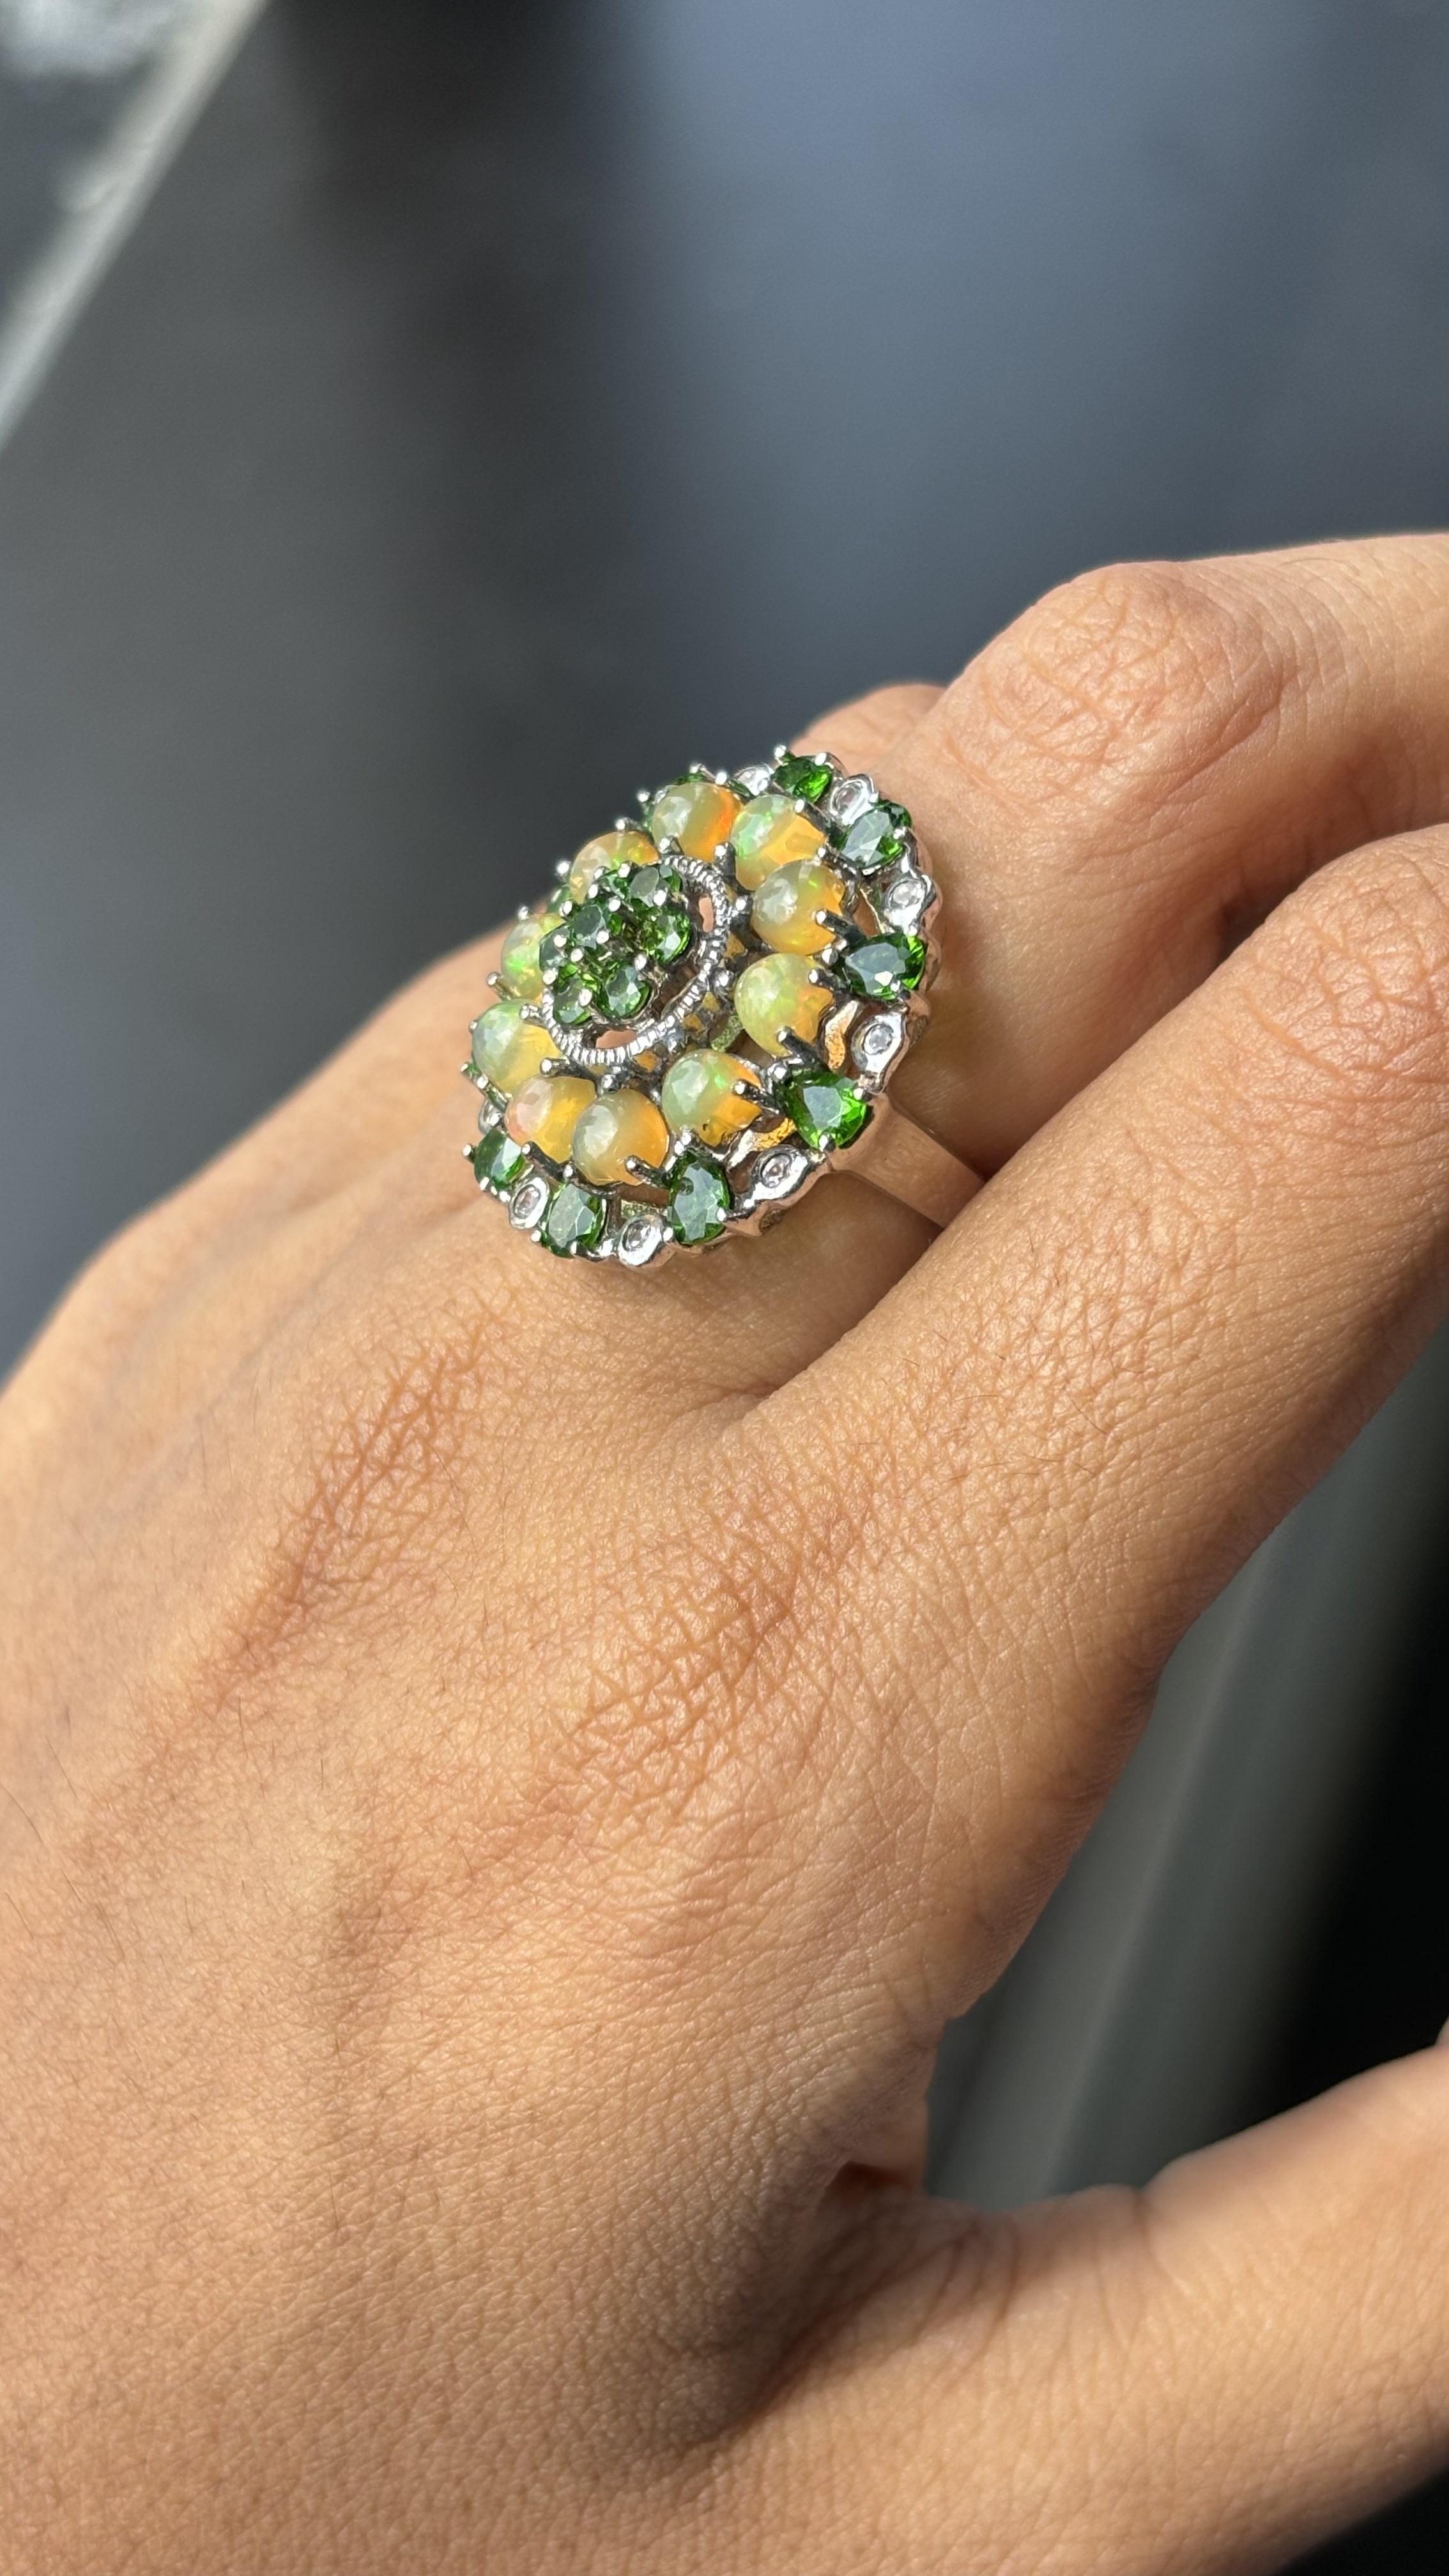 Antique circa 1900s Diopside, Opal & White Topaz Fancy Cocktail Ring in Silver For Sale 2